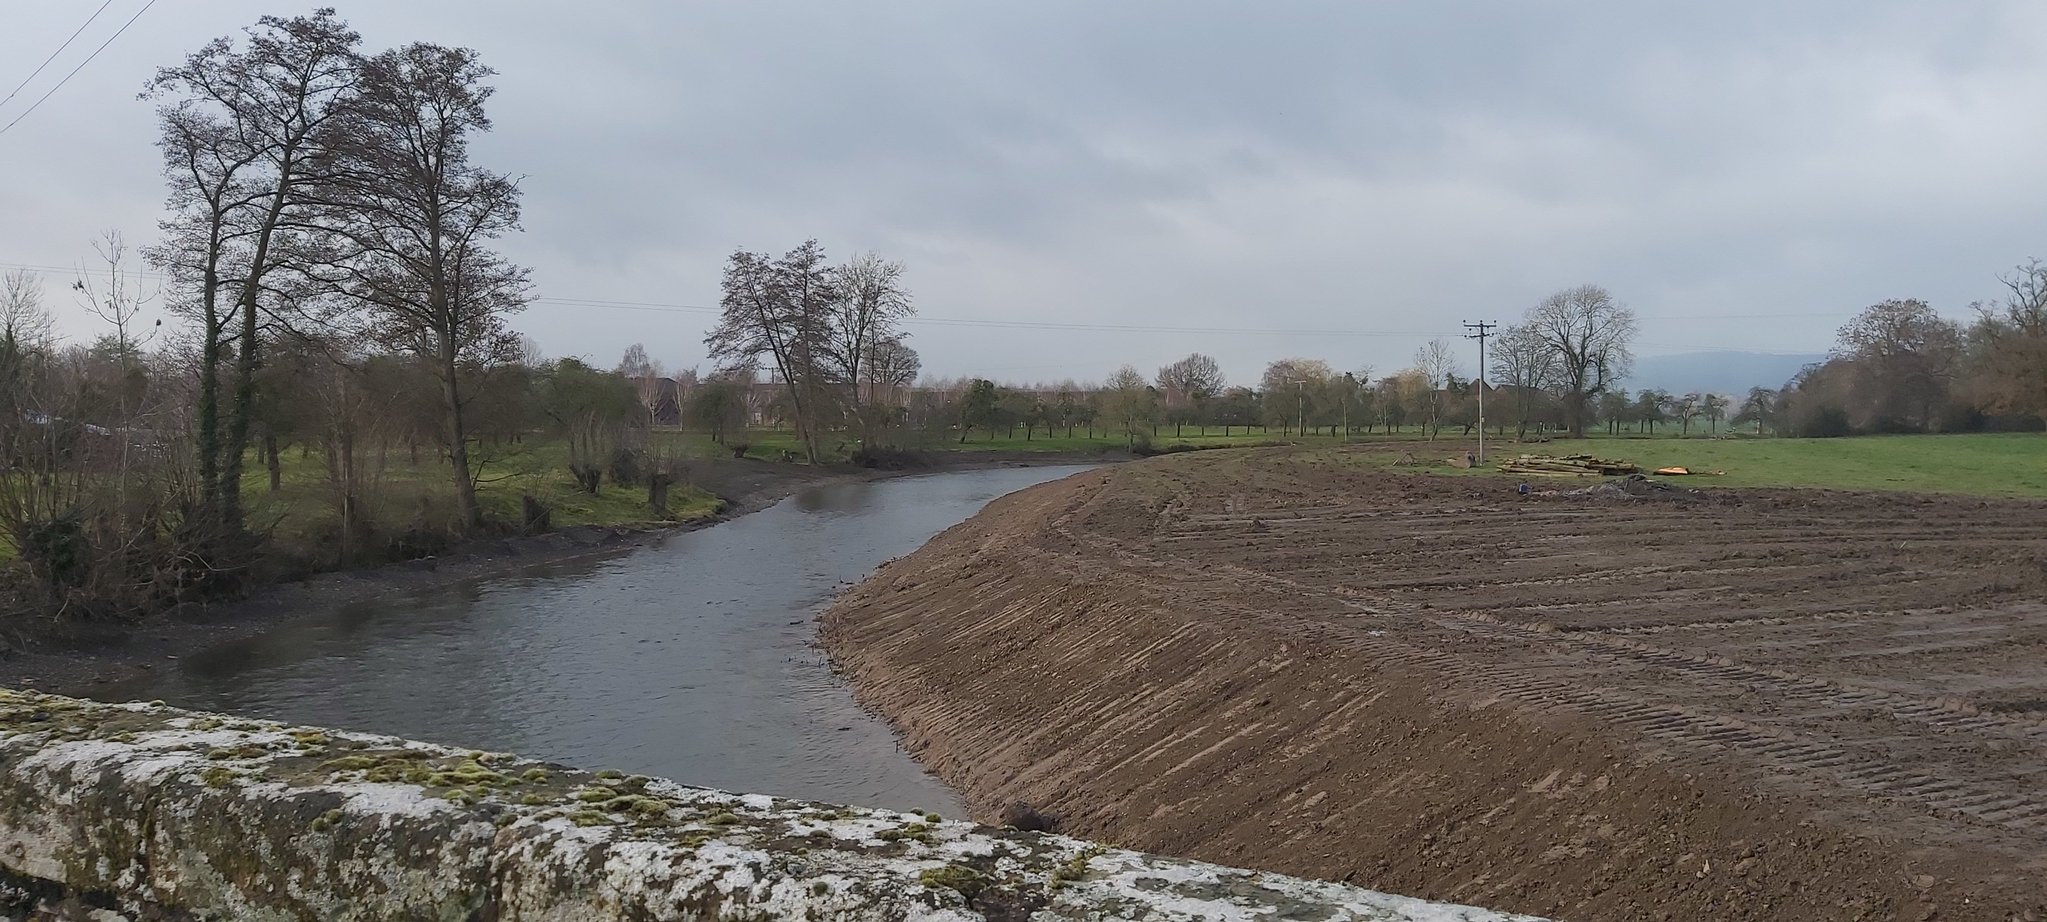 NEWS | RIVER LUGG: Work was done WITHOUT consent Environment Agency, Forestry Commission and Natural England confirm